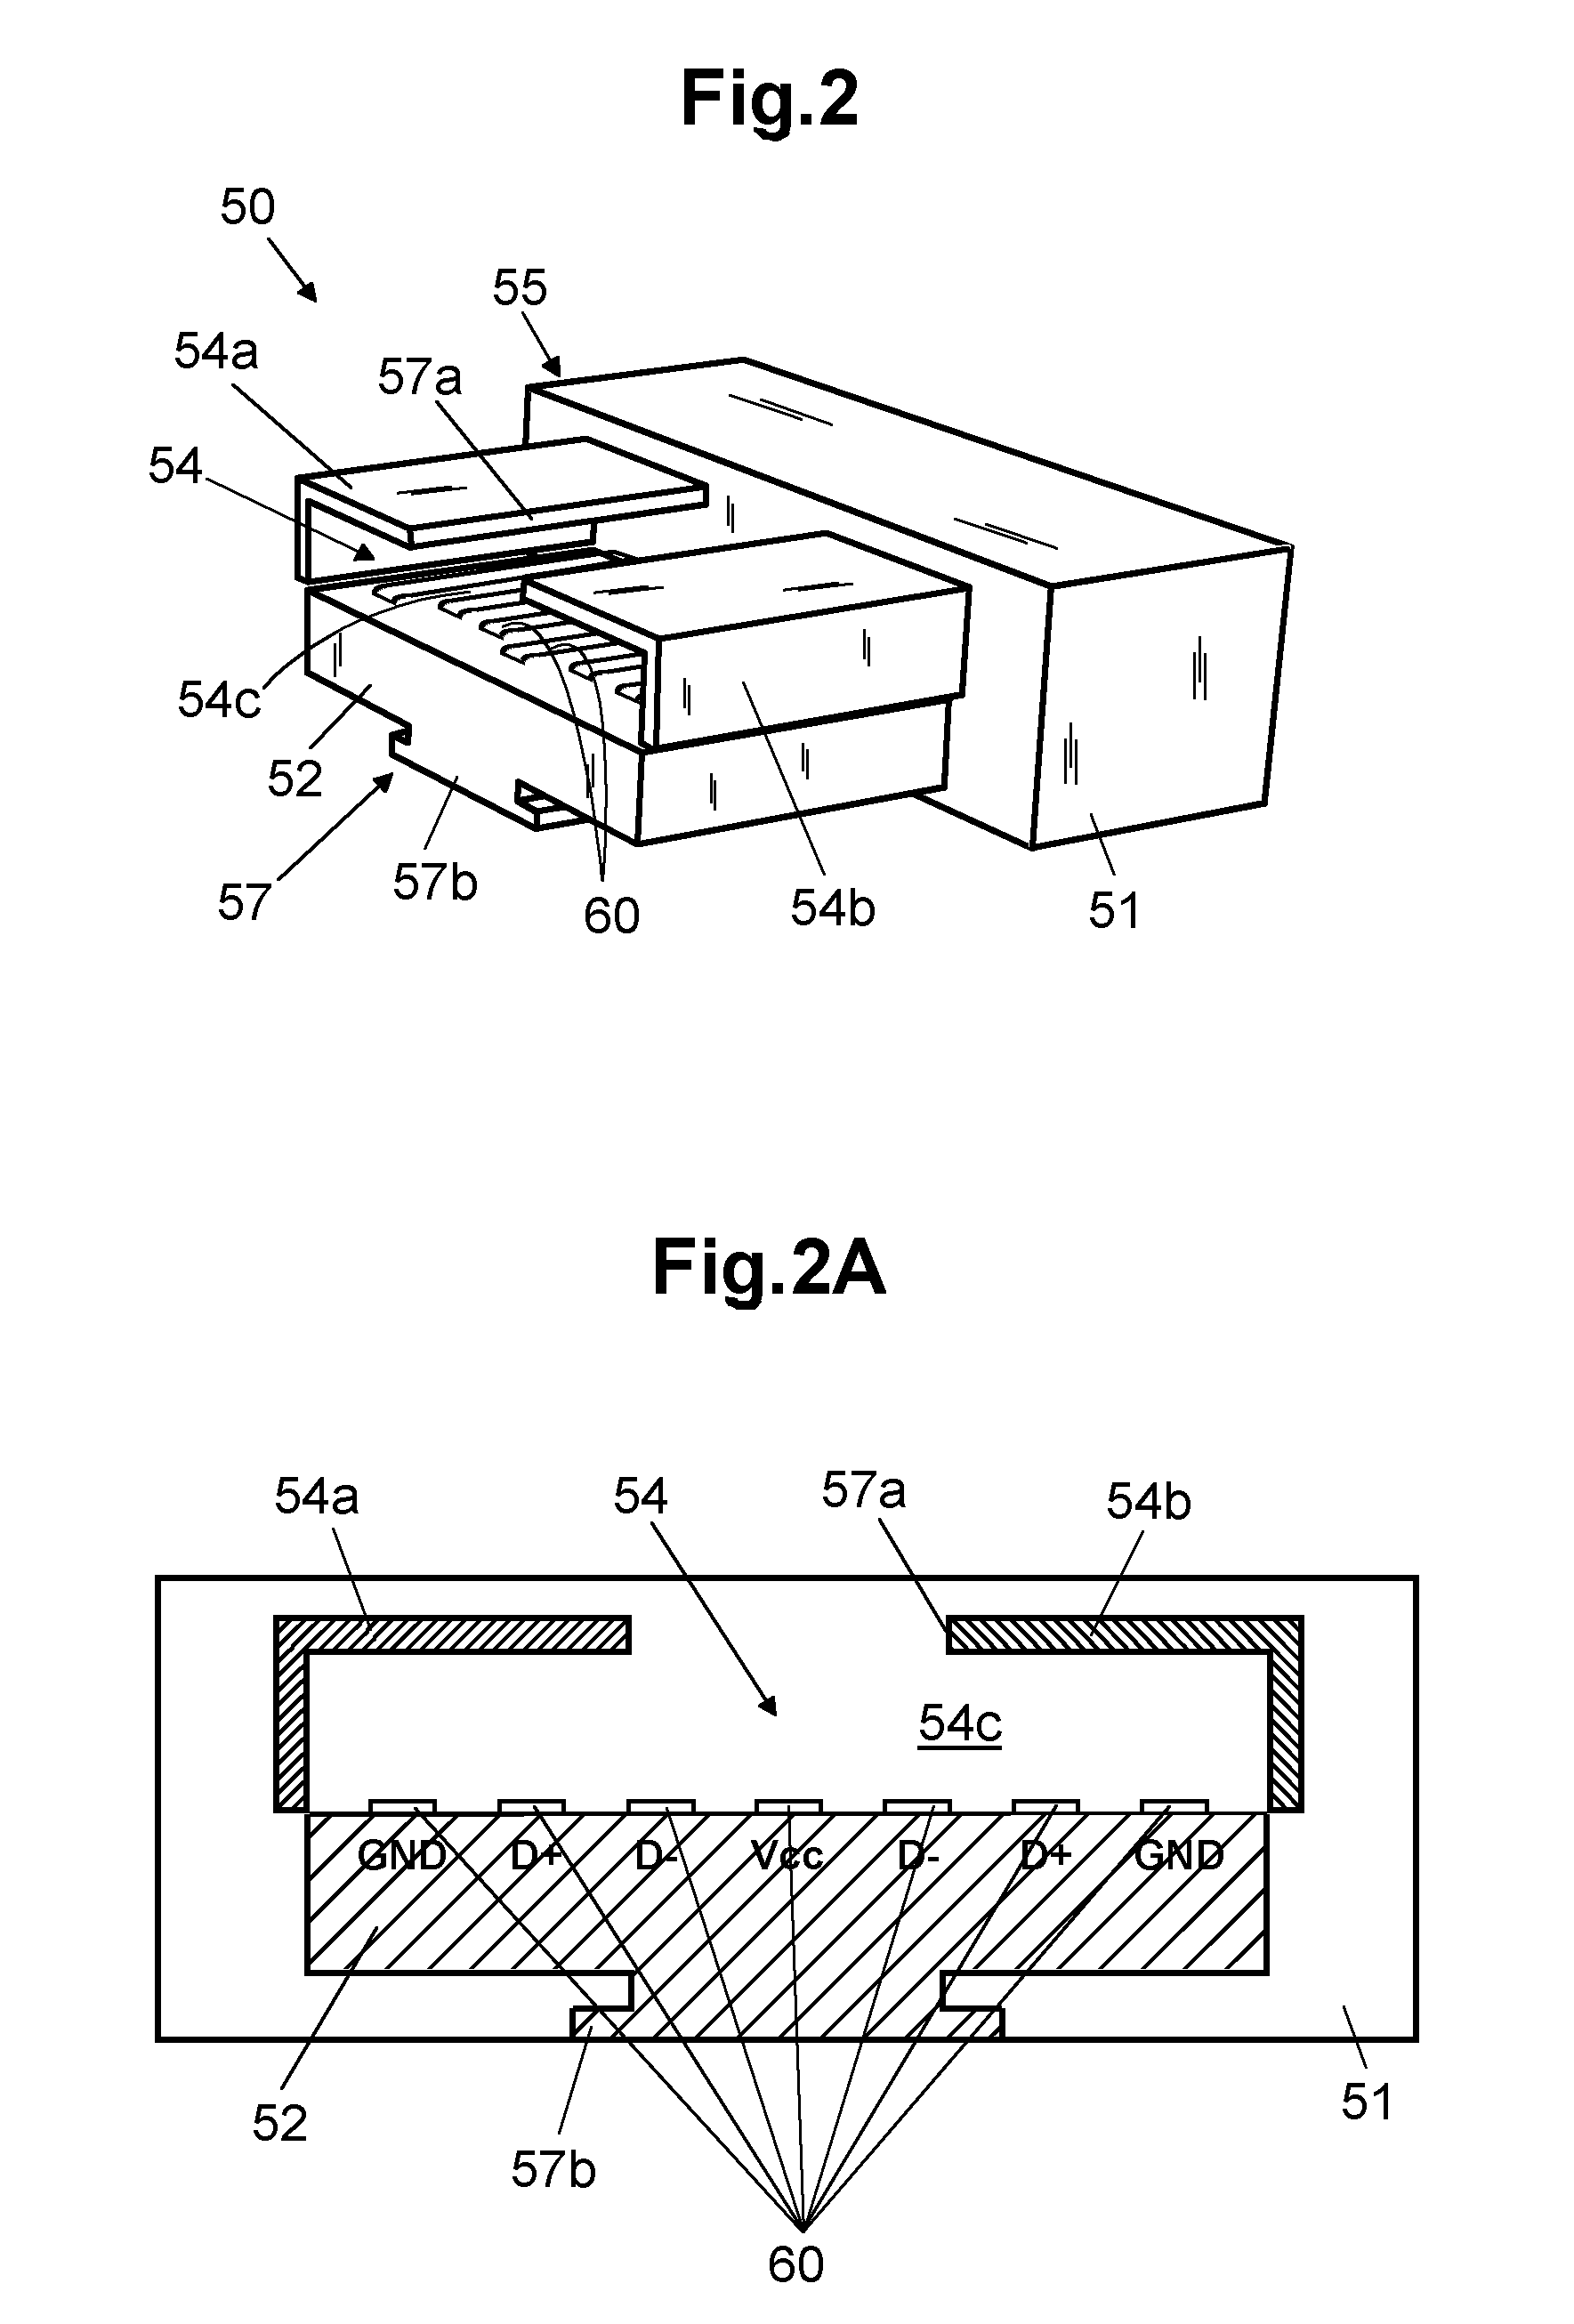 Payment card, related reading device and bracelet comprising the payment card